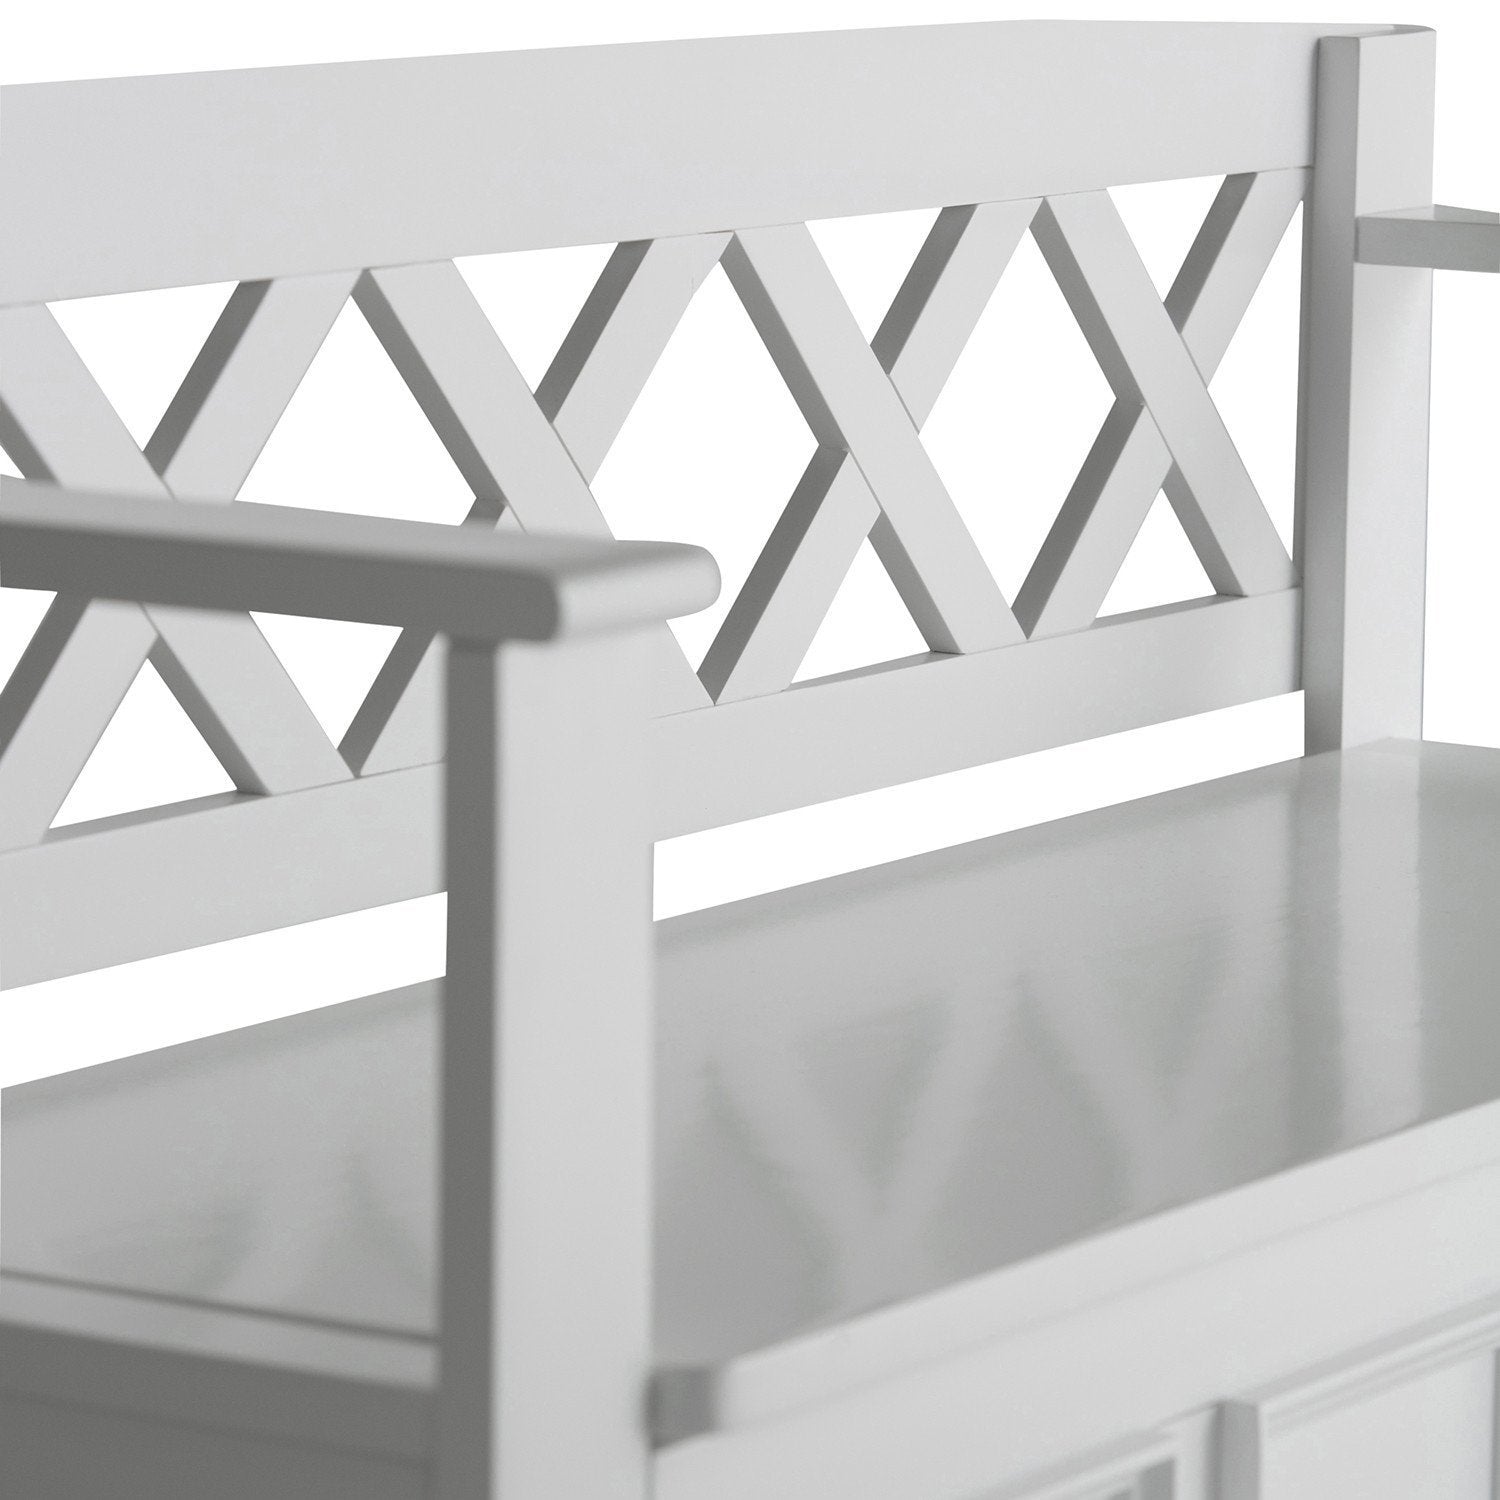 White | Amherst Entryway Bench